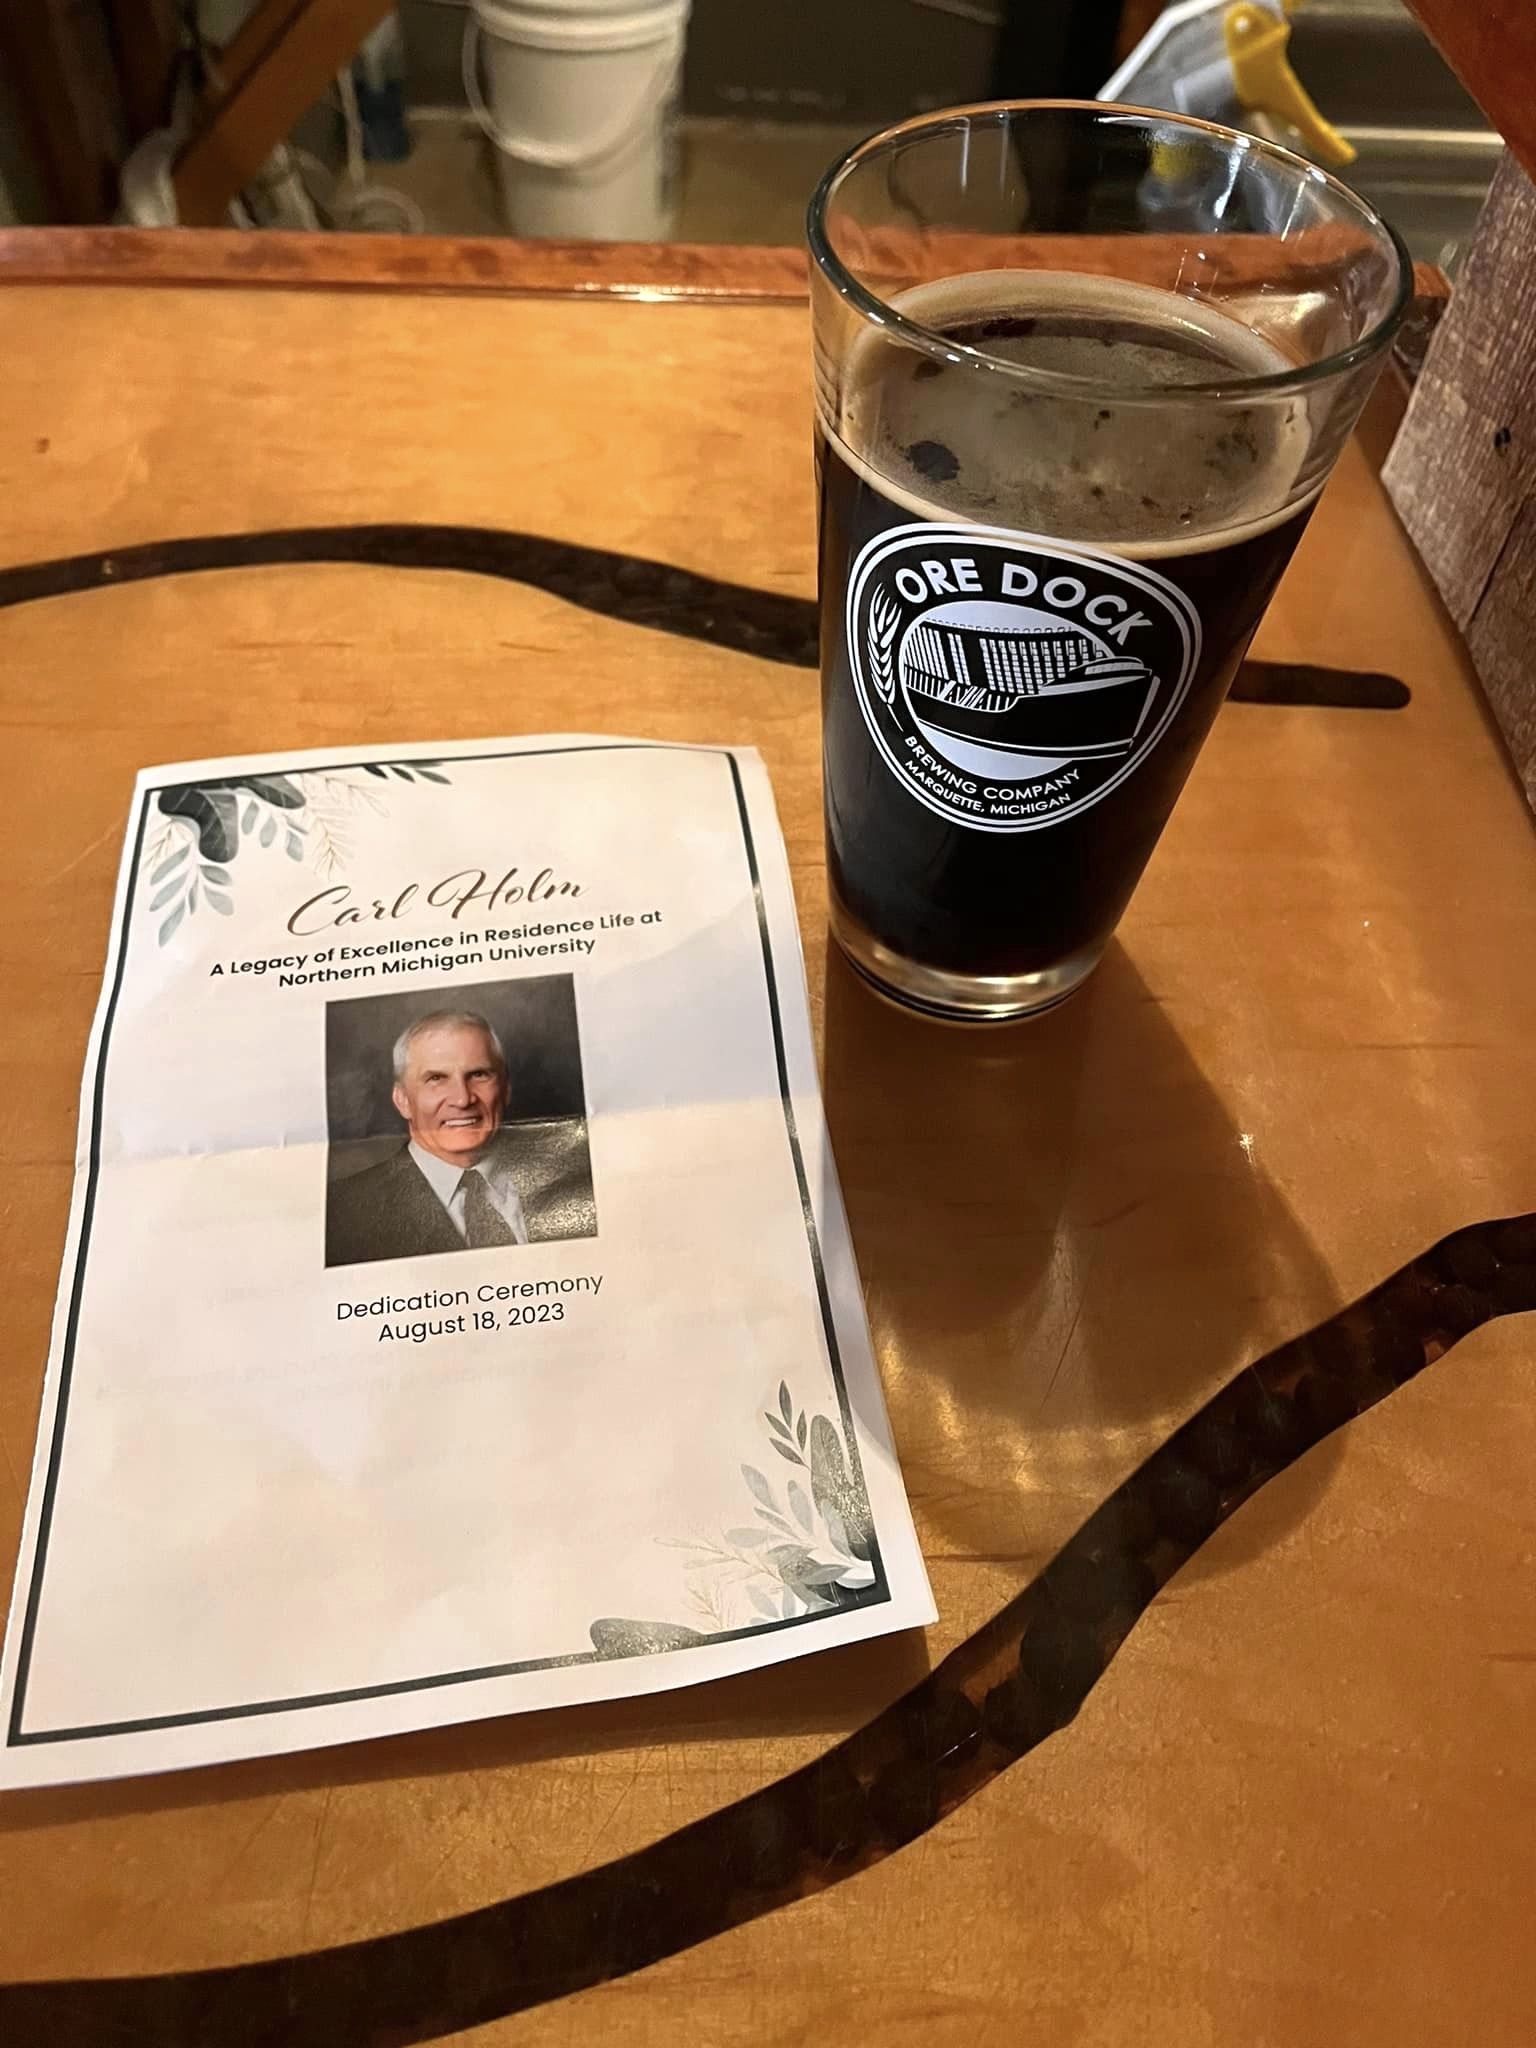 A glass of beer and the program cover 